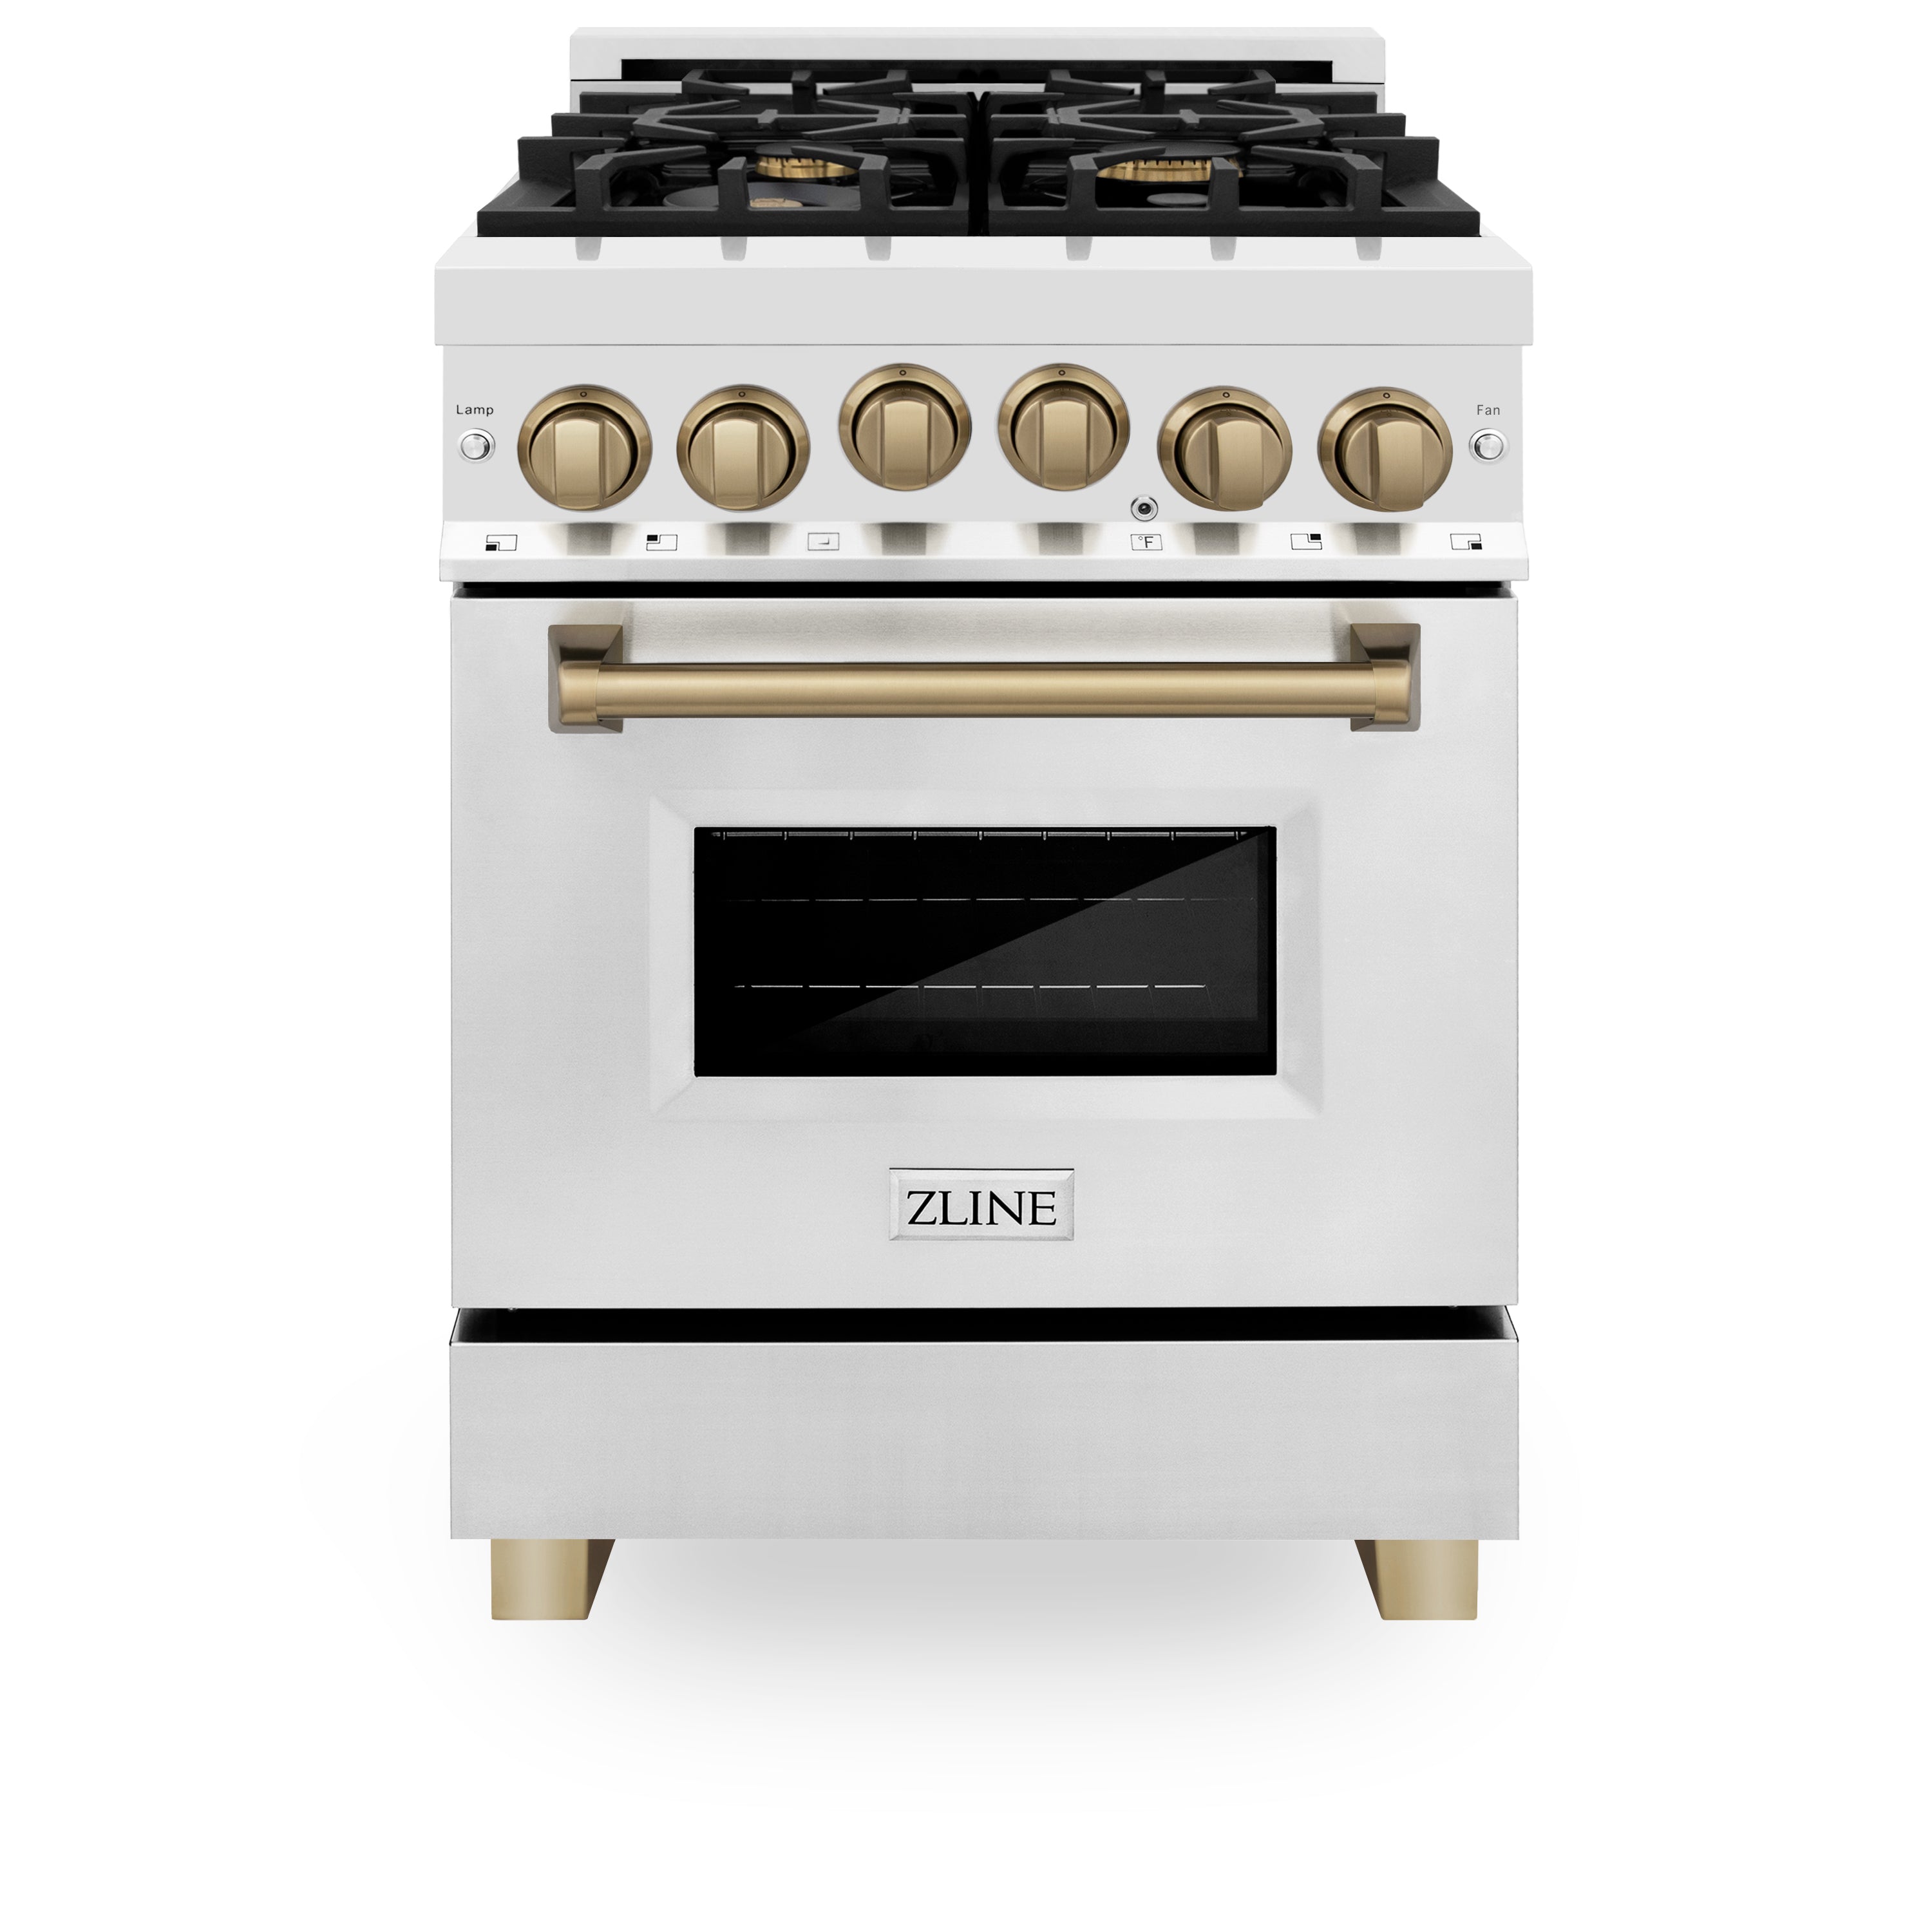 ZLINE Autograph Edition 24" 2.8 cu. ft. Dual Fuel Range with Gas Stove and Electric Oven in Stainless Steel with Champagne Bronze Accents (RAZ-24-CB)